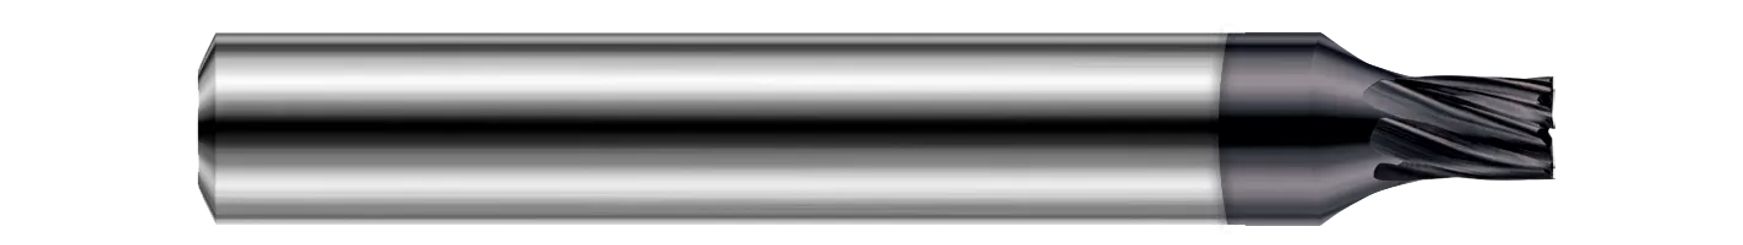 End Mills for Hardened Steels-Square-For Steels 45-68 Rc